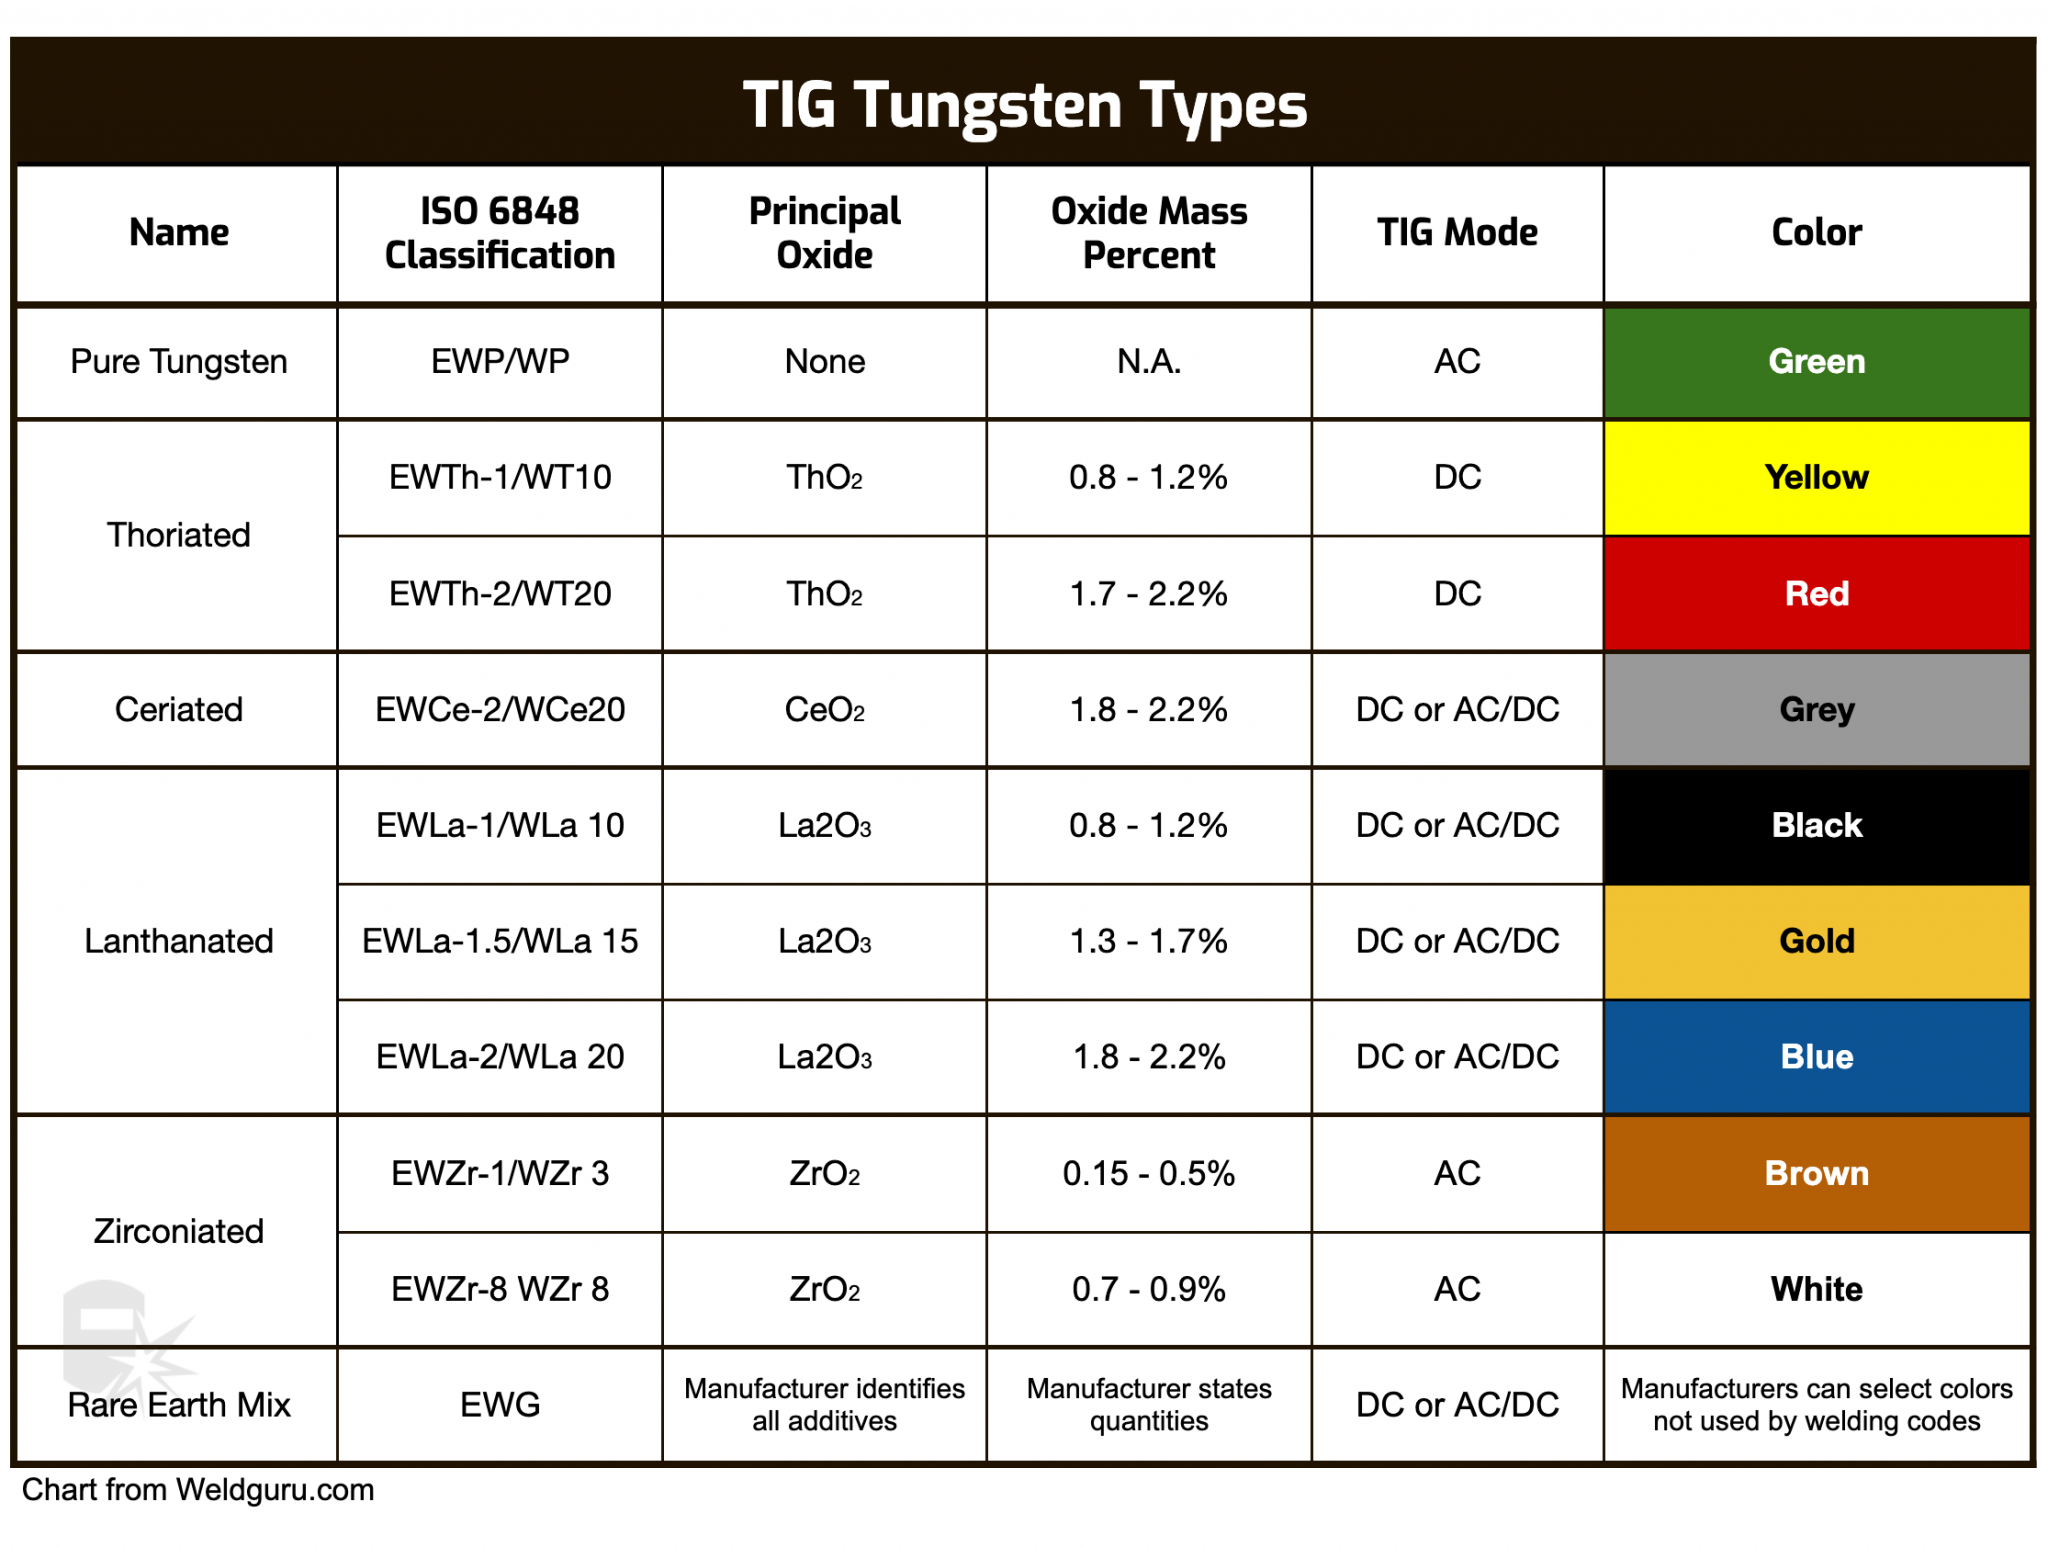 Tig Tungsten Electrodes Explained With Color Chart